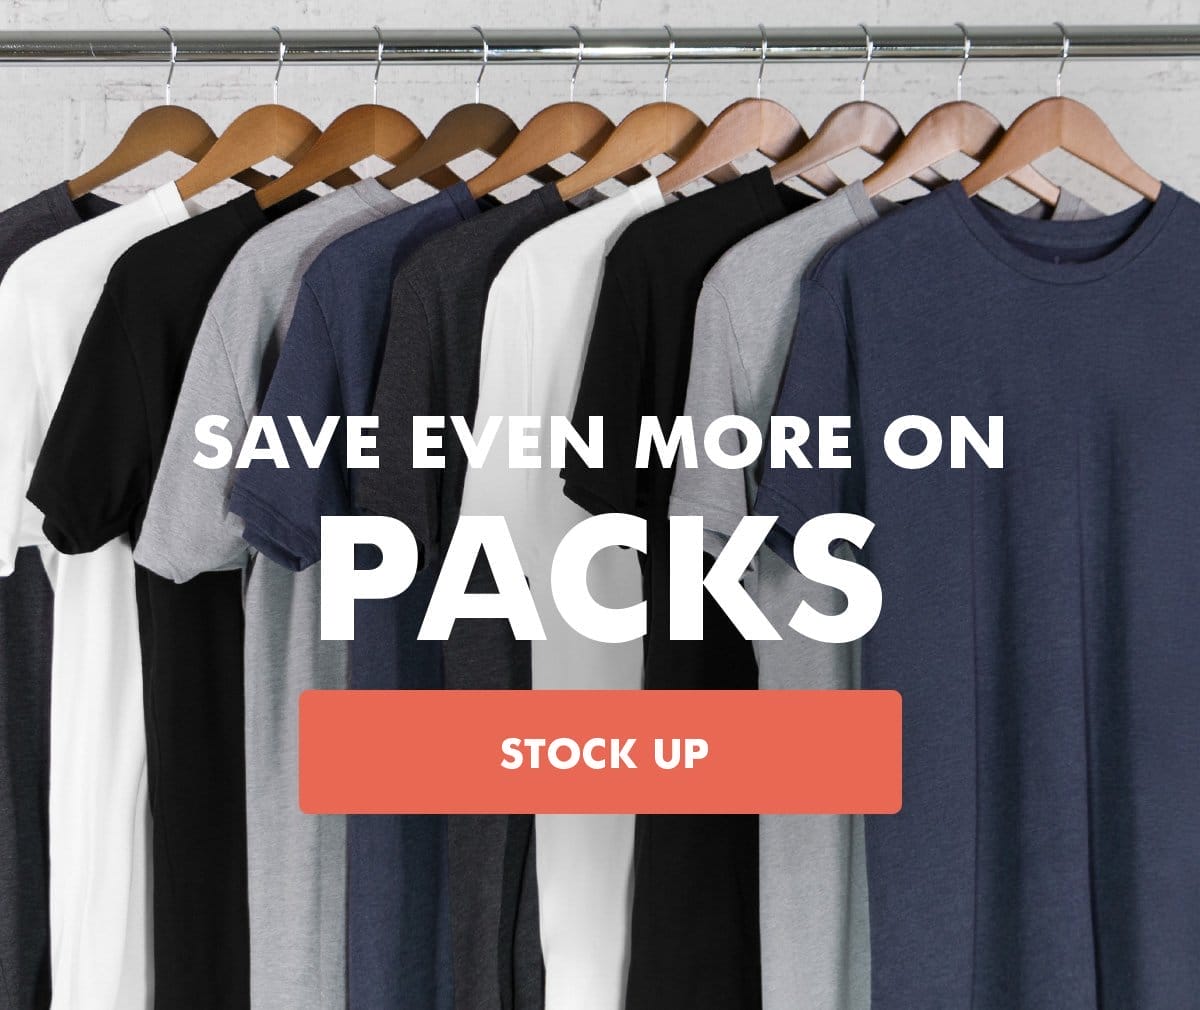 Save even more on packs. Stock up.